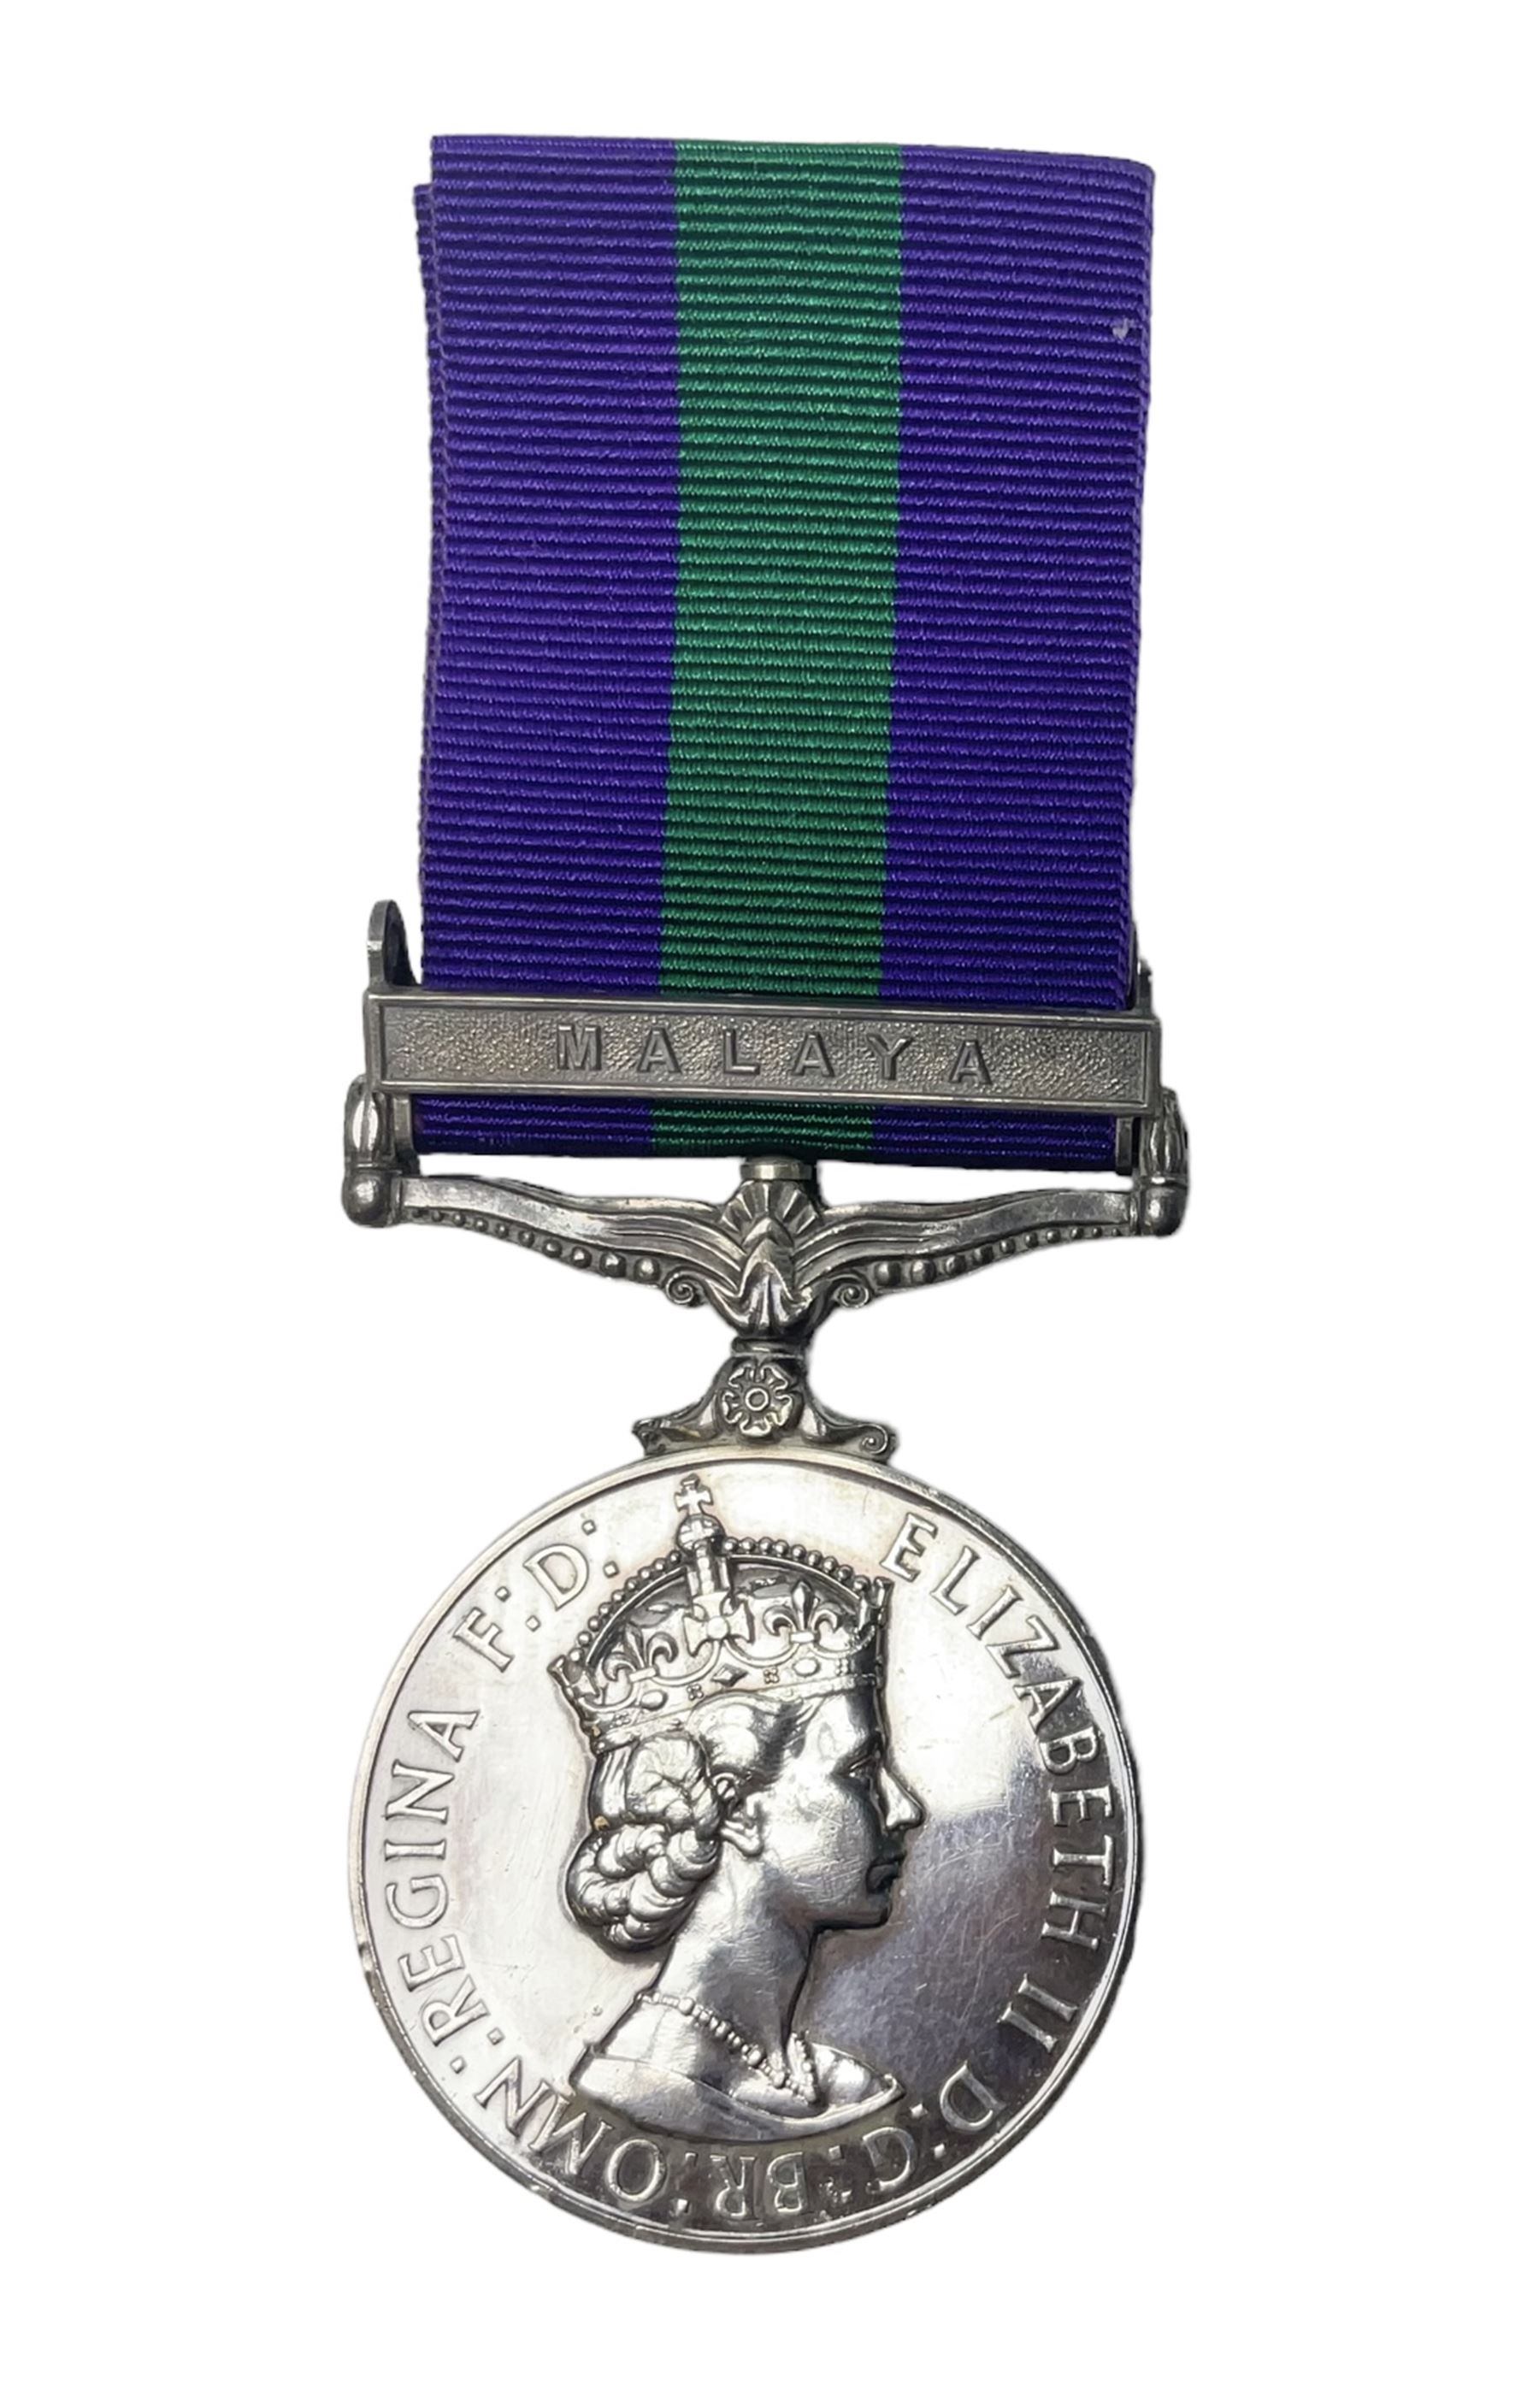 Elizabeth II General Service Medal with Malaya clasp awarded to 22682079 Pte. J. Siddall E. Yorks.;